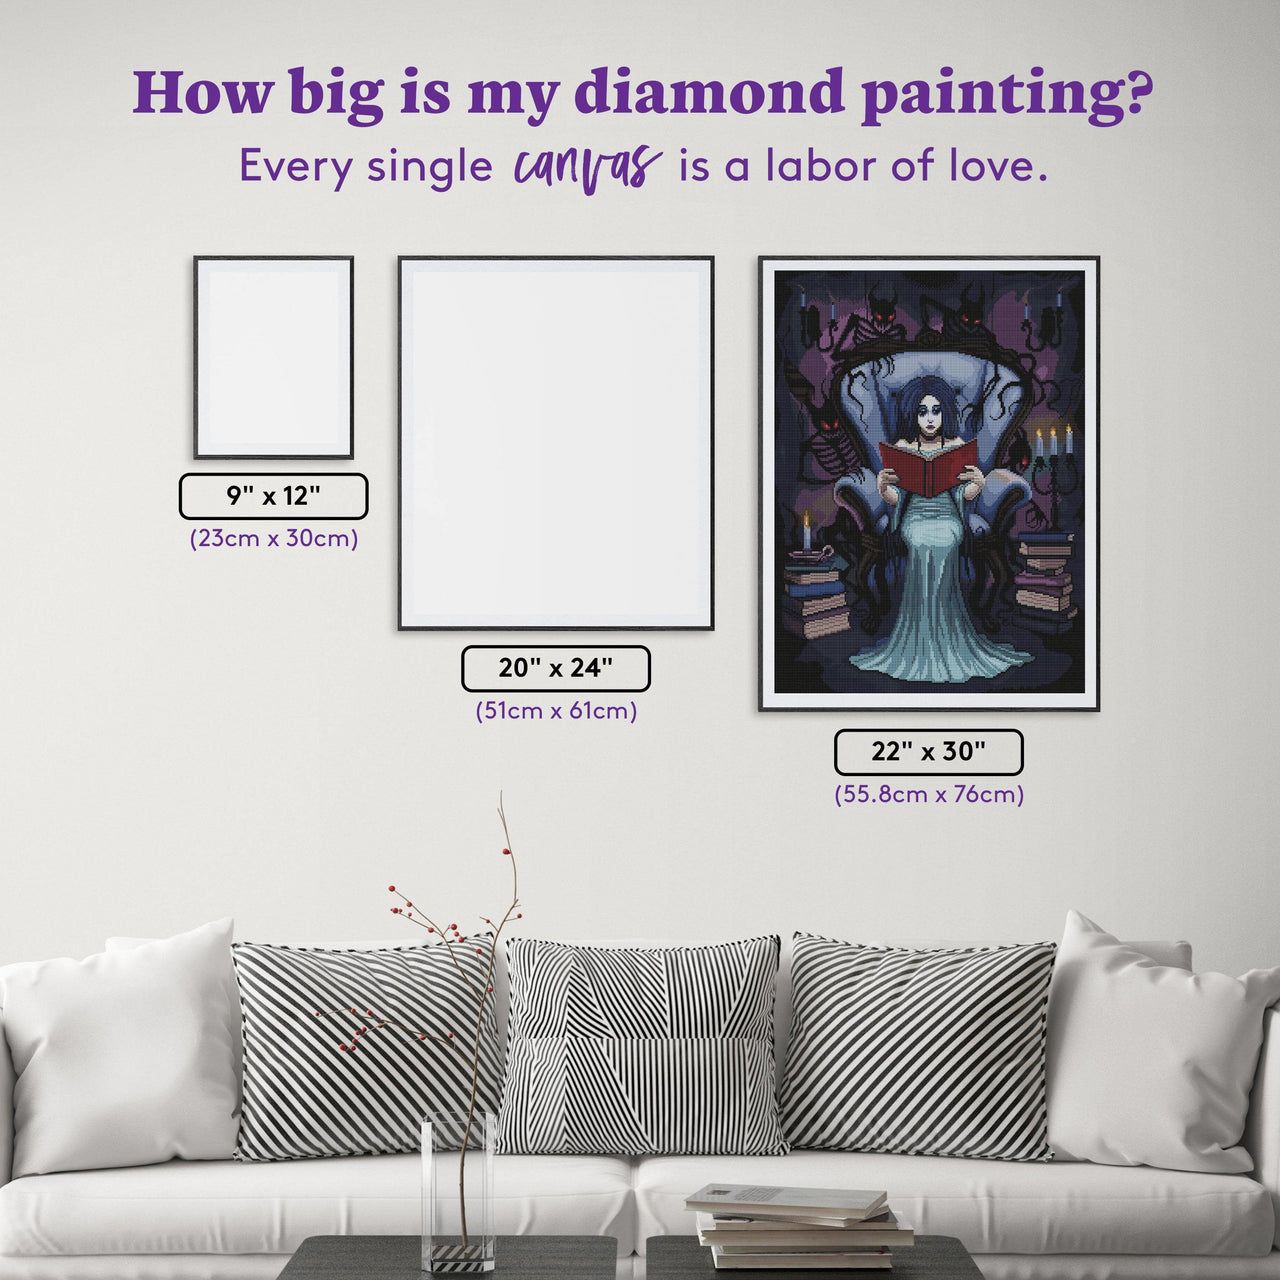 Diamond Painting Just A Story 22" x 30" (55.8cm x 76cm) / Round with 37 Colors including 2 ABs and 1 Glow in Dark Diamonds / 53,929